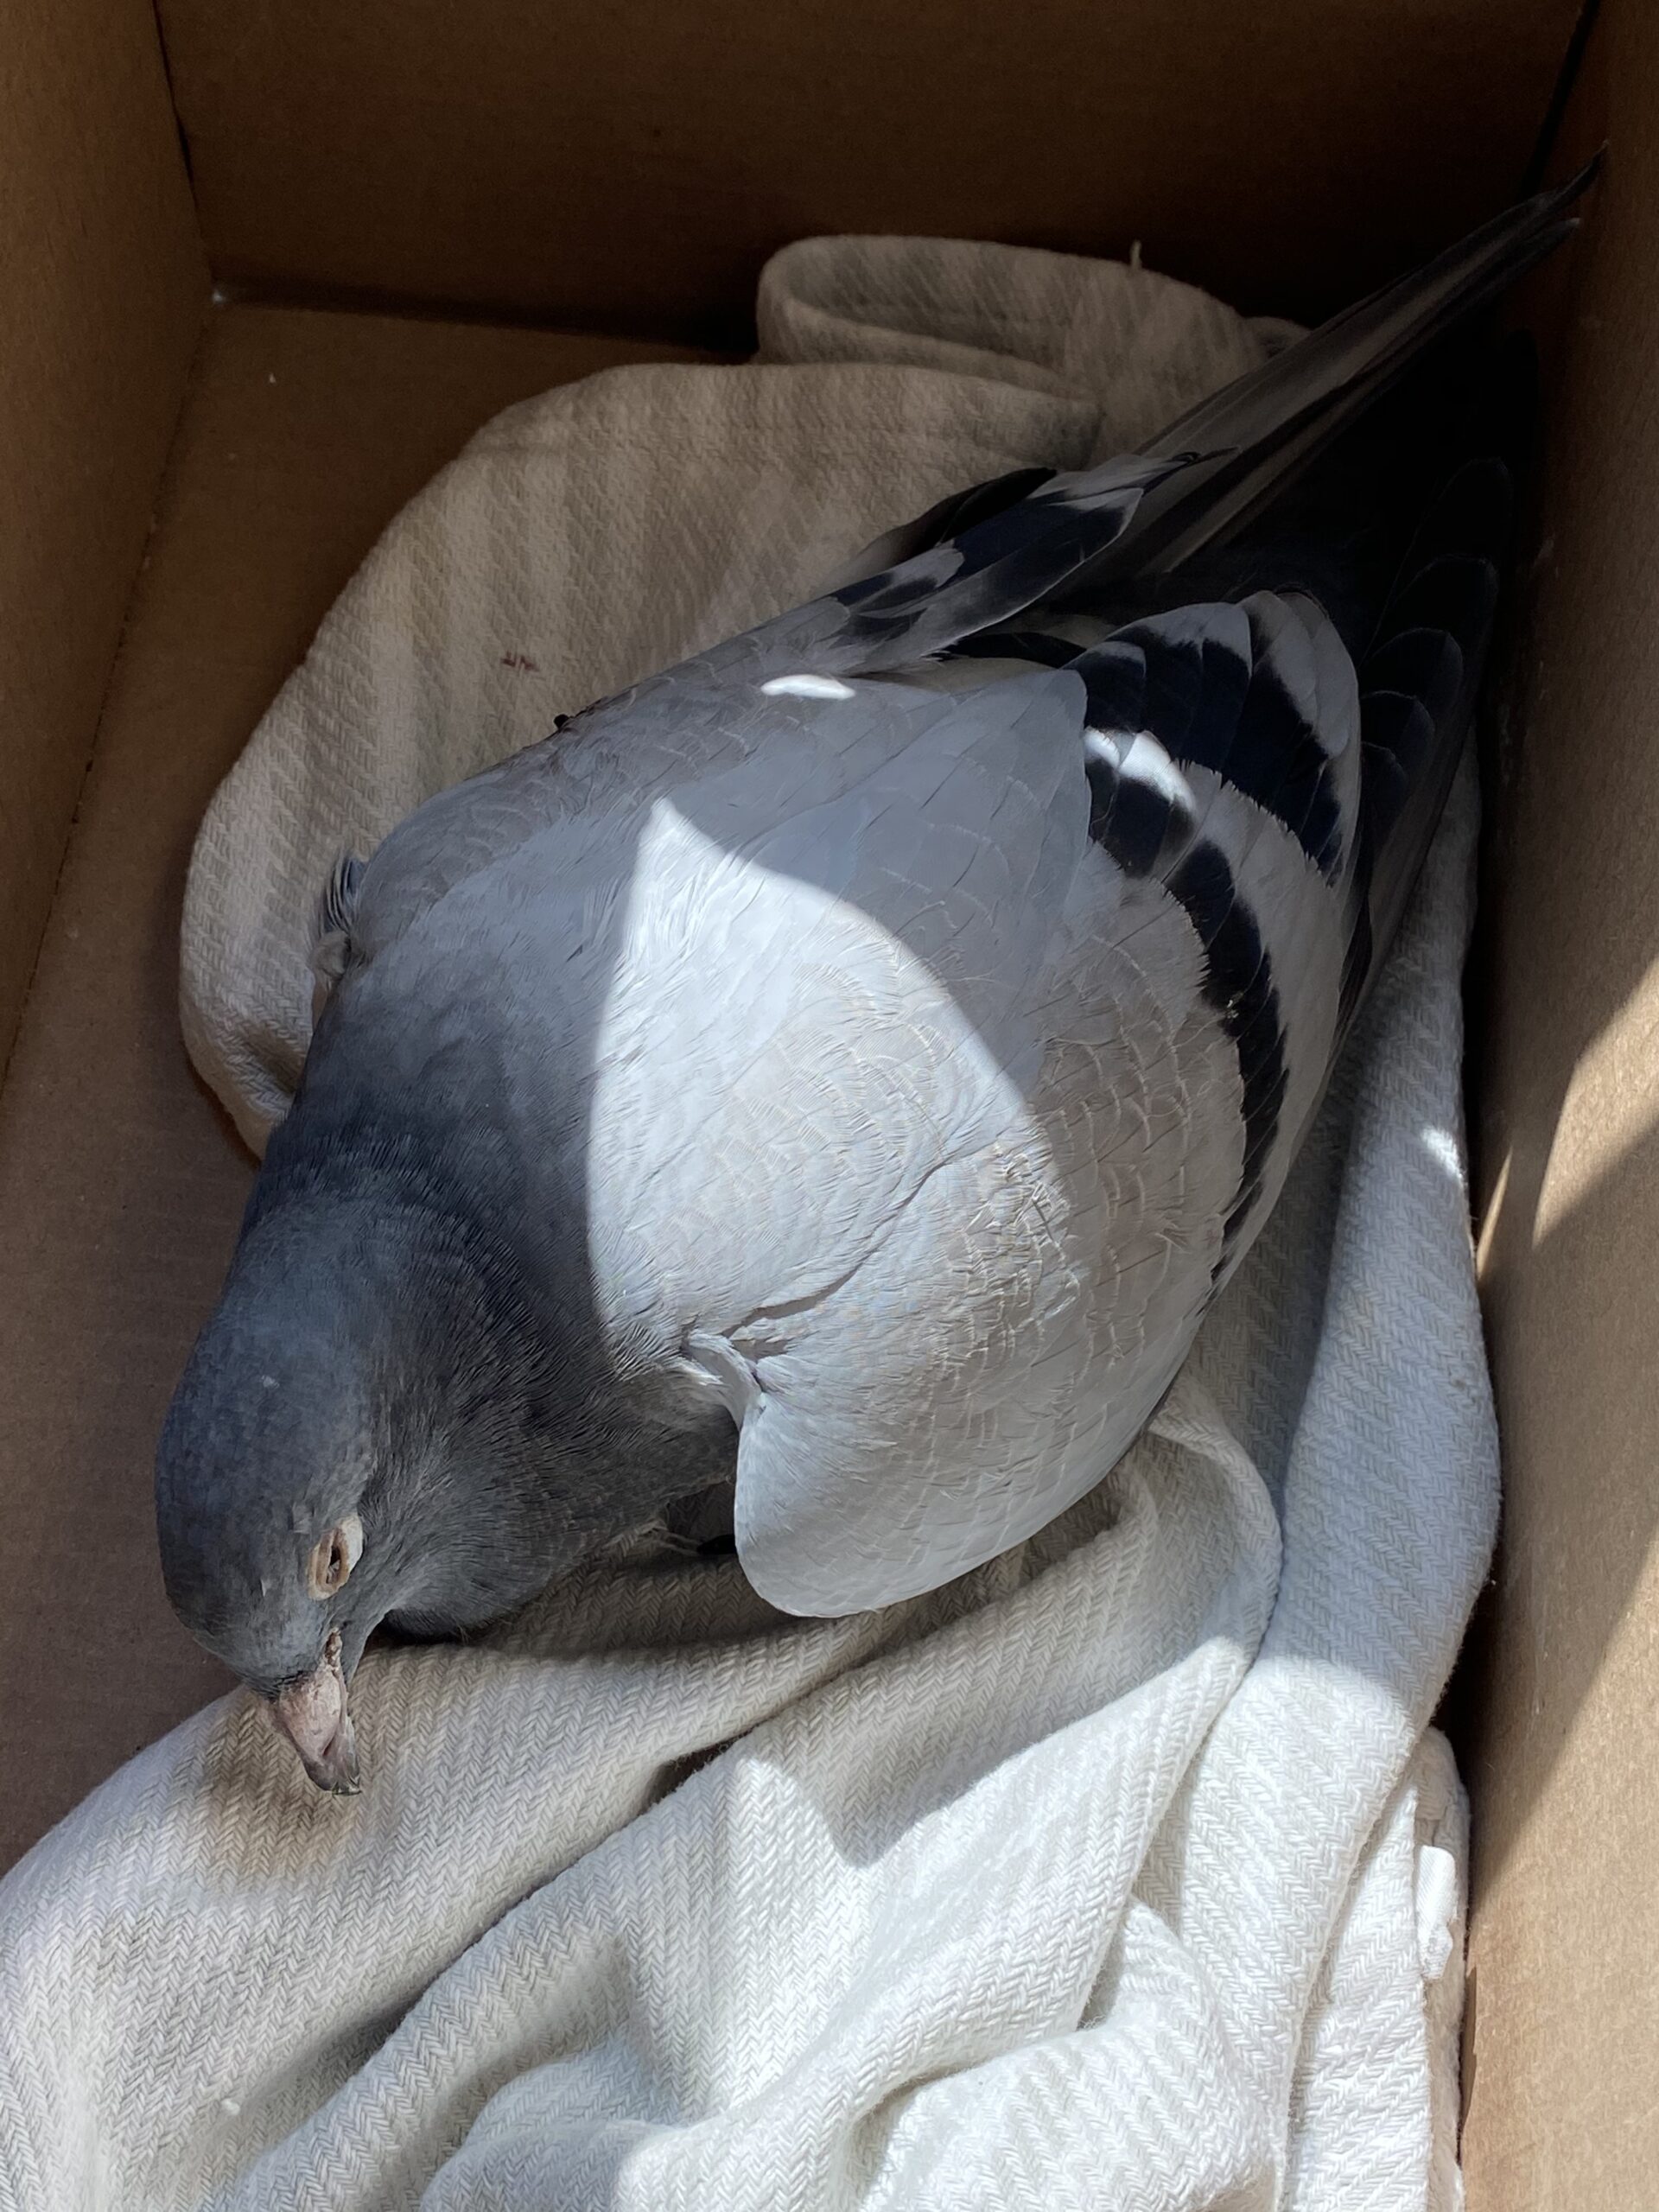 Injured racing pigeon in a box